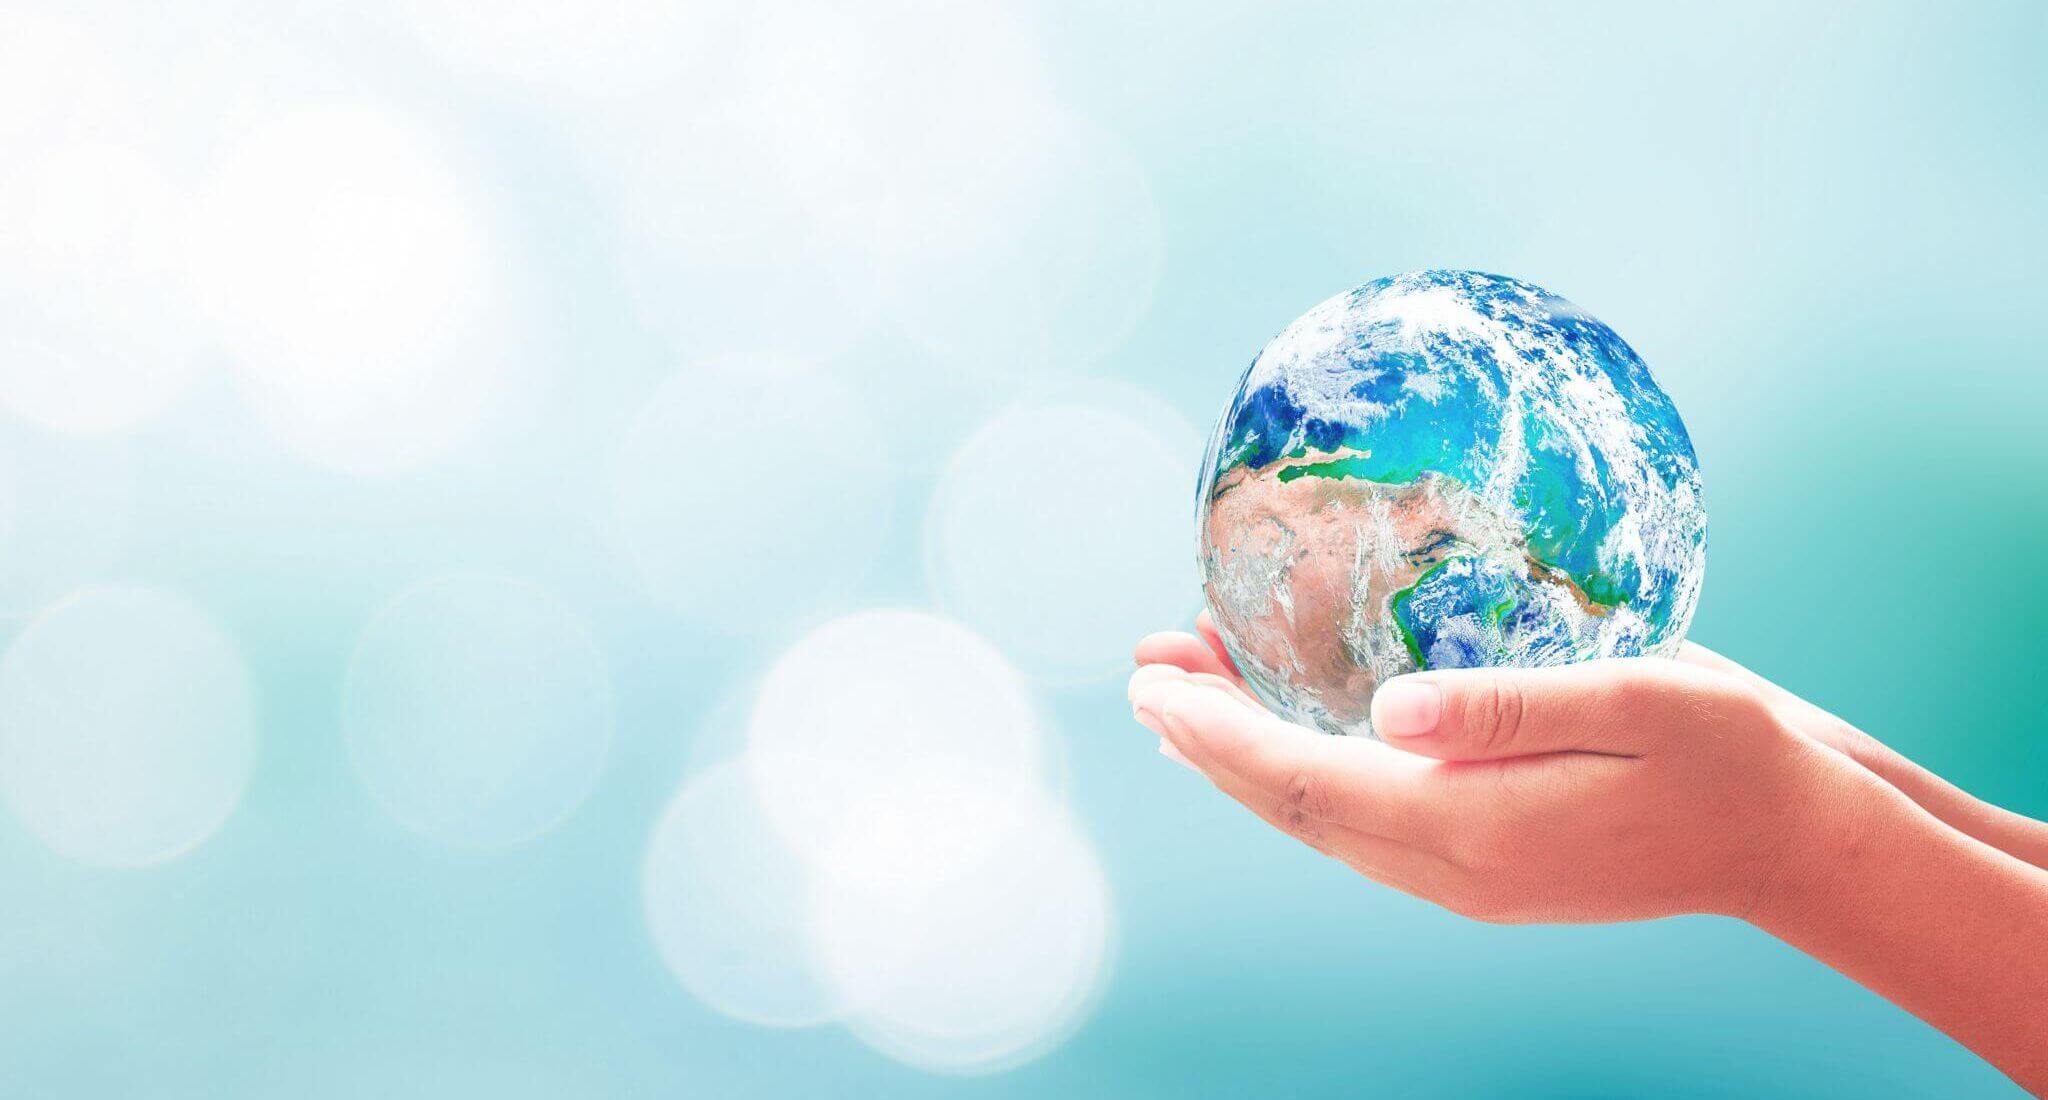 Hands cradle a small globe representing the idea that companies need to tread carefully on the planet. This is increasingly important for businesses who need to show evidence of their management of environmental, social and governance (ESG) issues